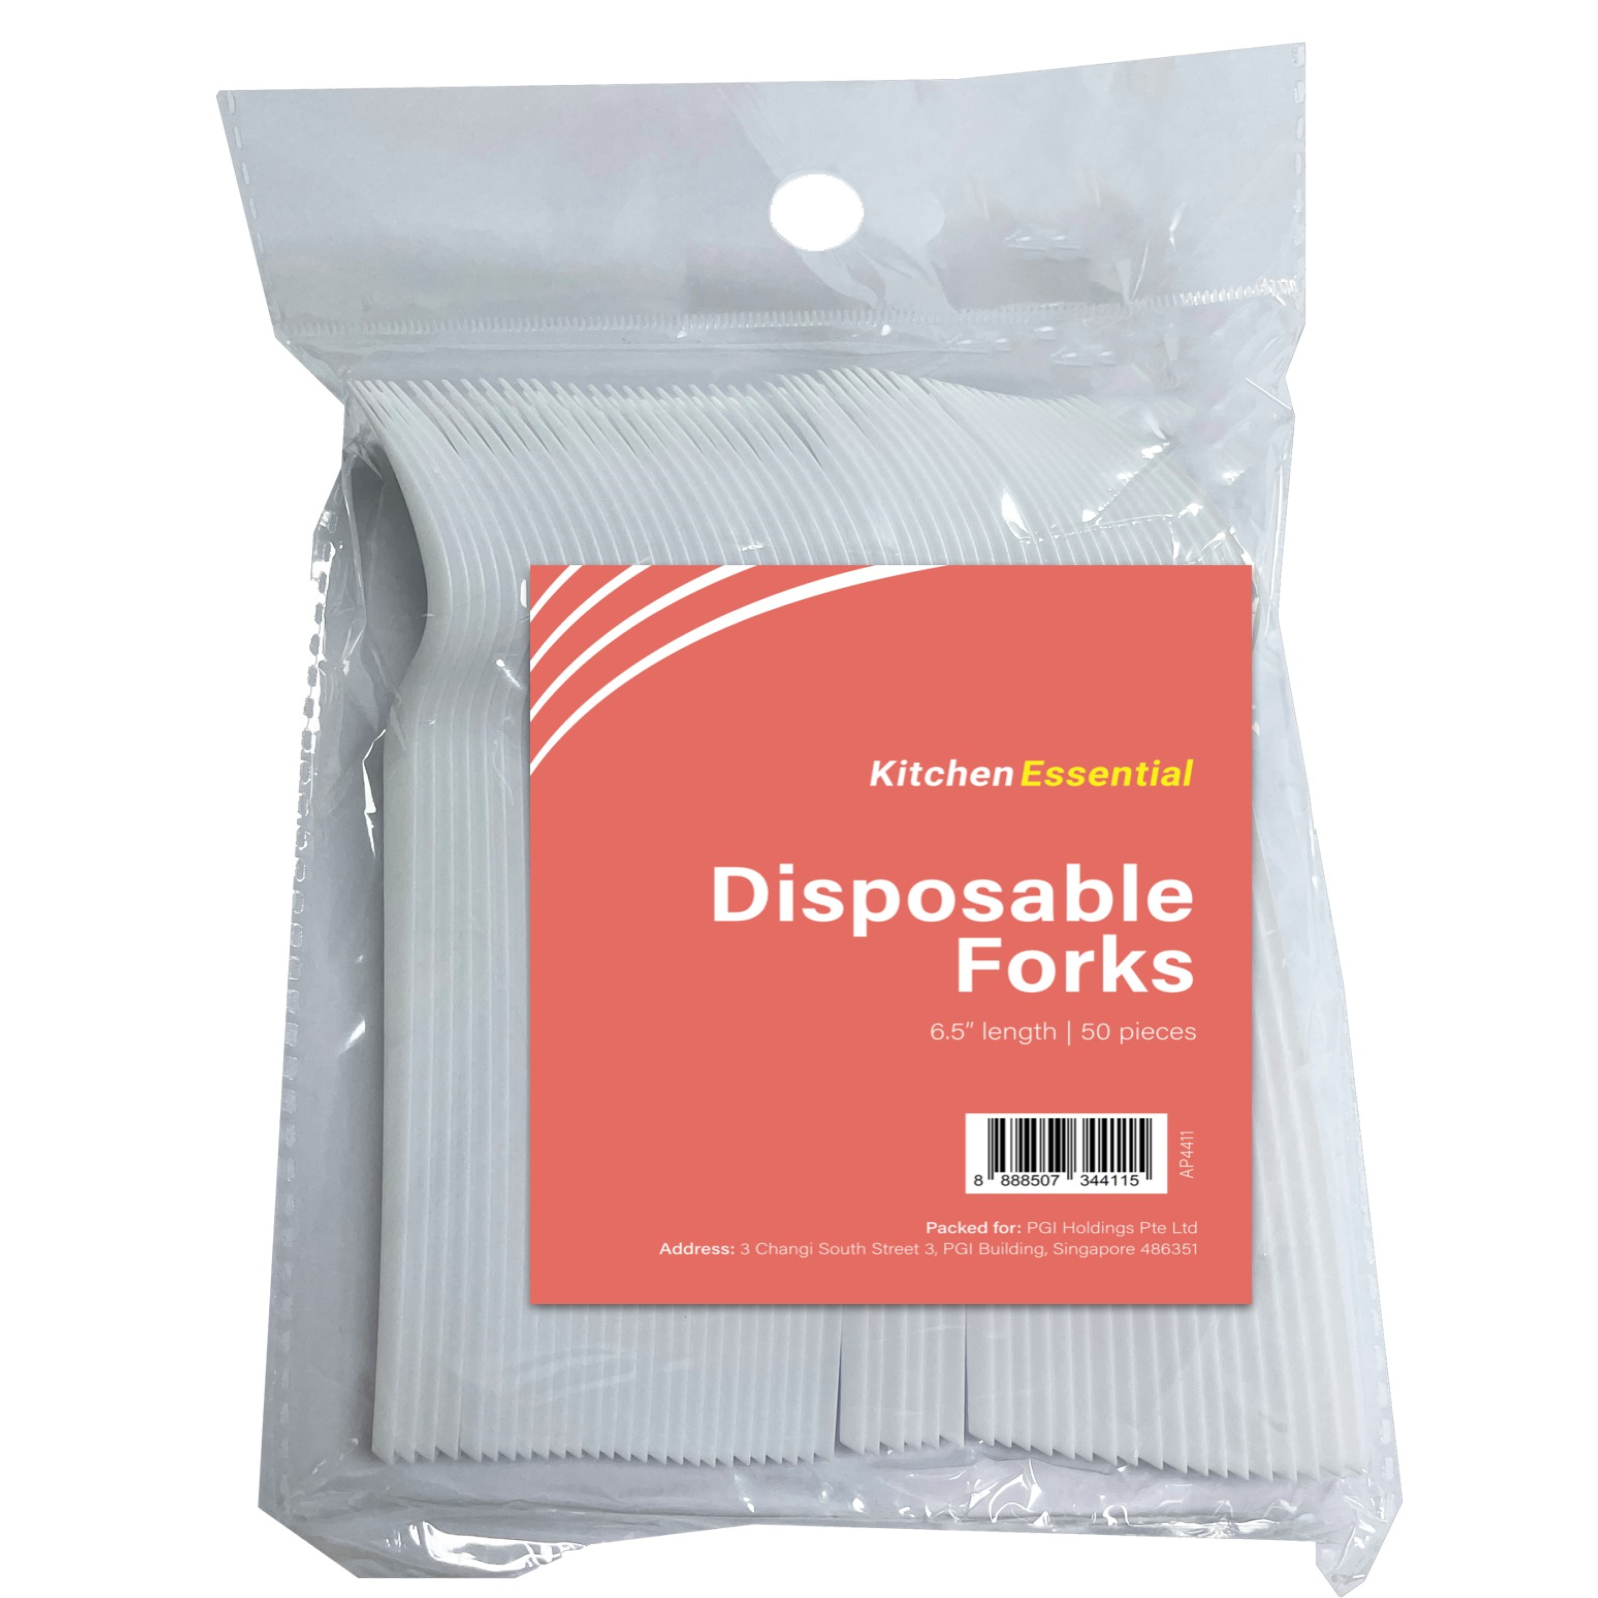 KITCHEN ESSENTIAL Disposable Forks 50PC/PACK 6.5" LENGTH